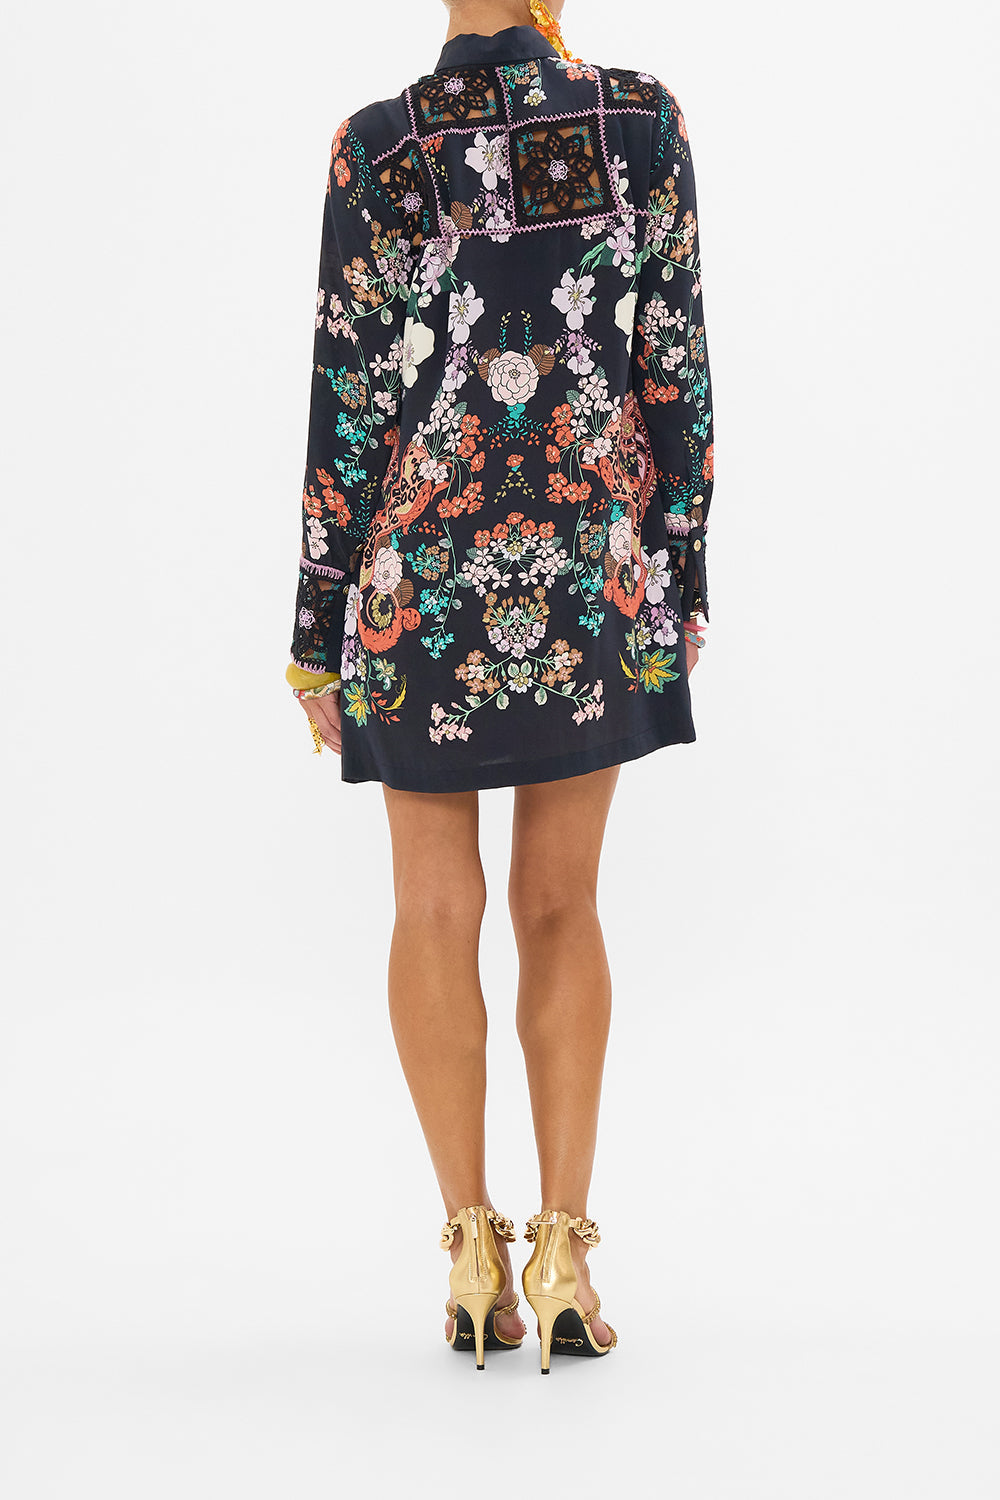 CAMILLA floral print shirt dress in We Wore Folklore print